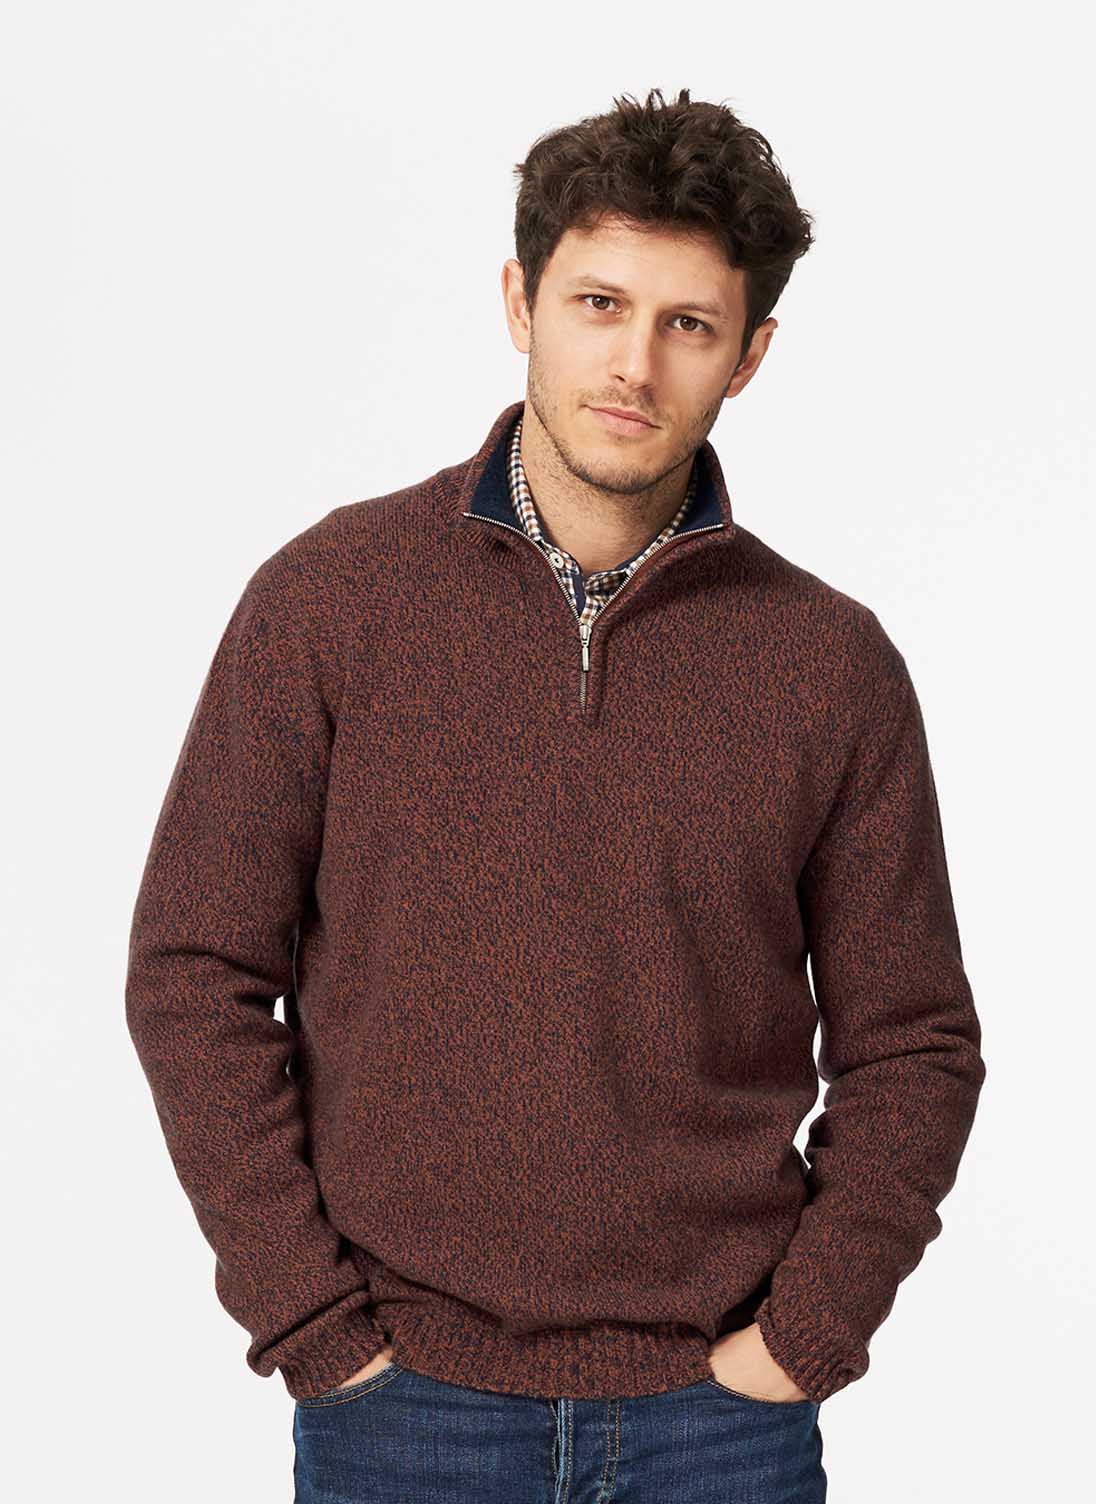 Cashmere Marl Zip Turtle Neck French Navy & Rust